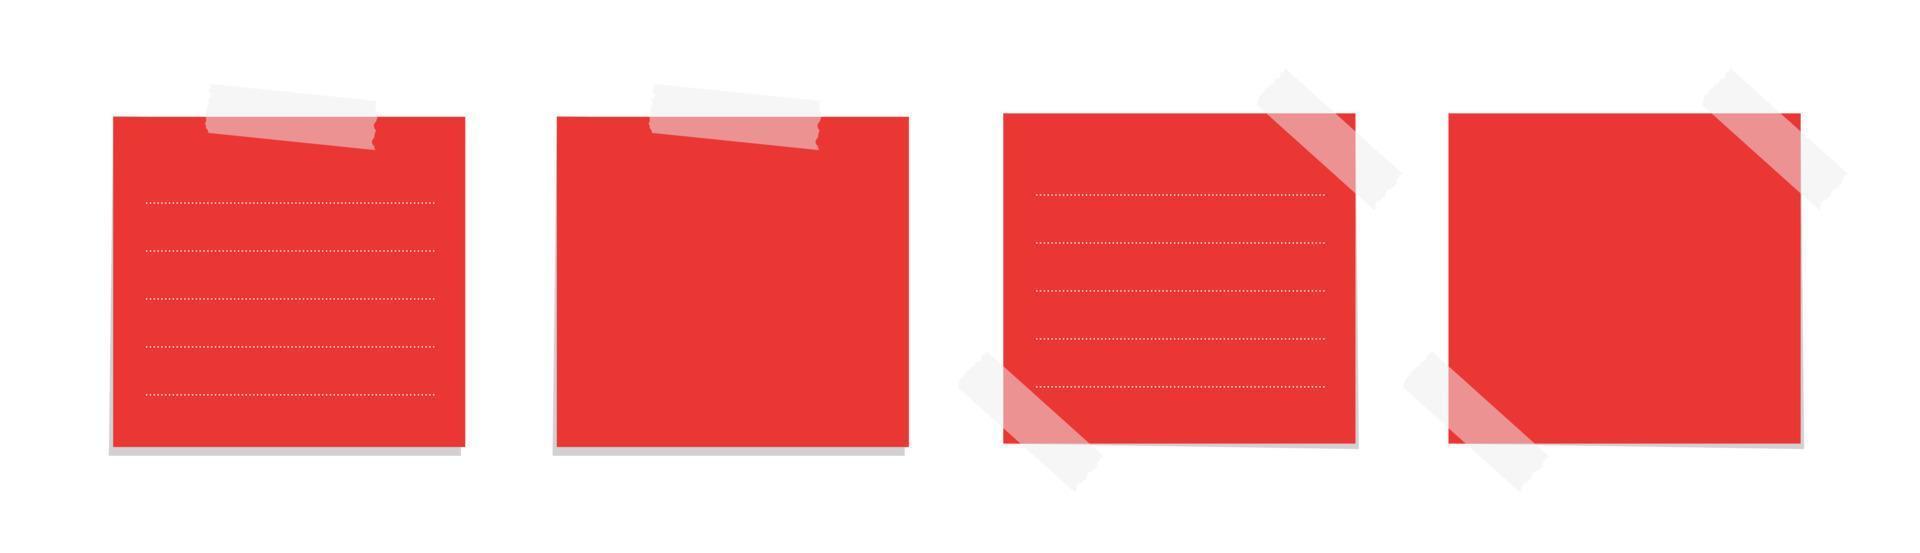 Square red sticky post note template mockup set. Taped office memo paper vector illustration.